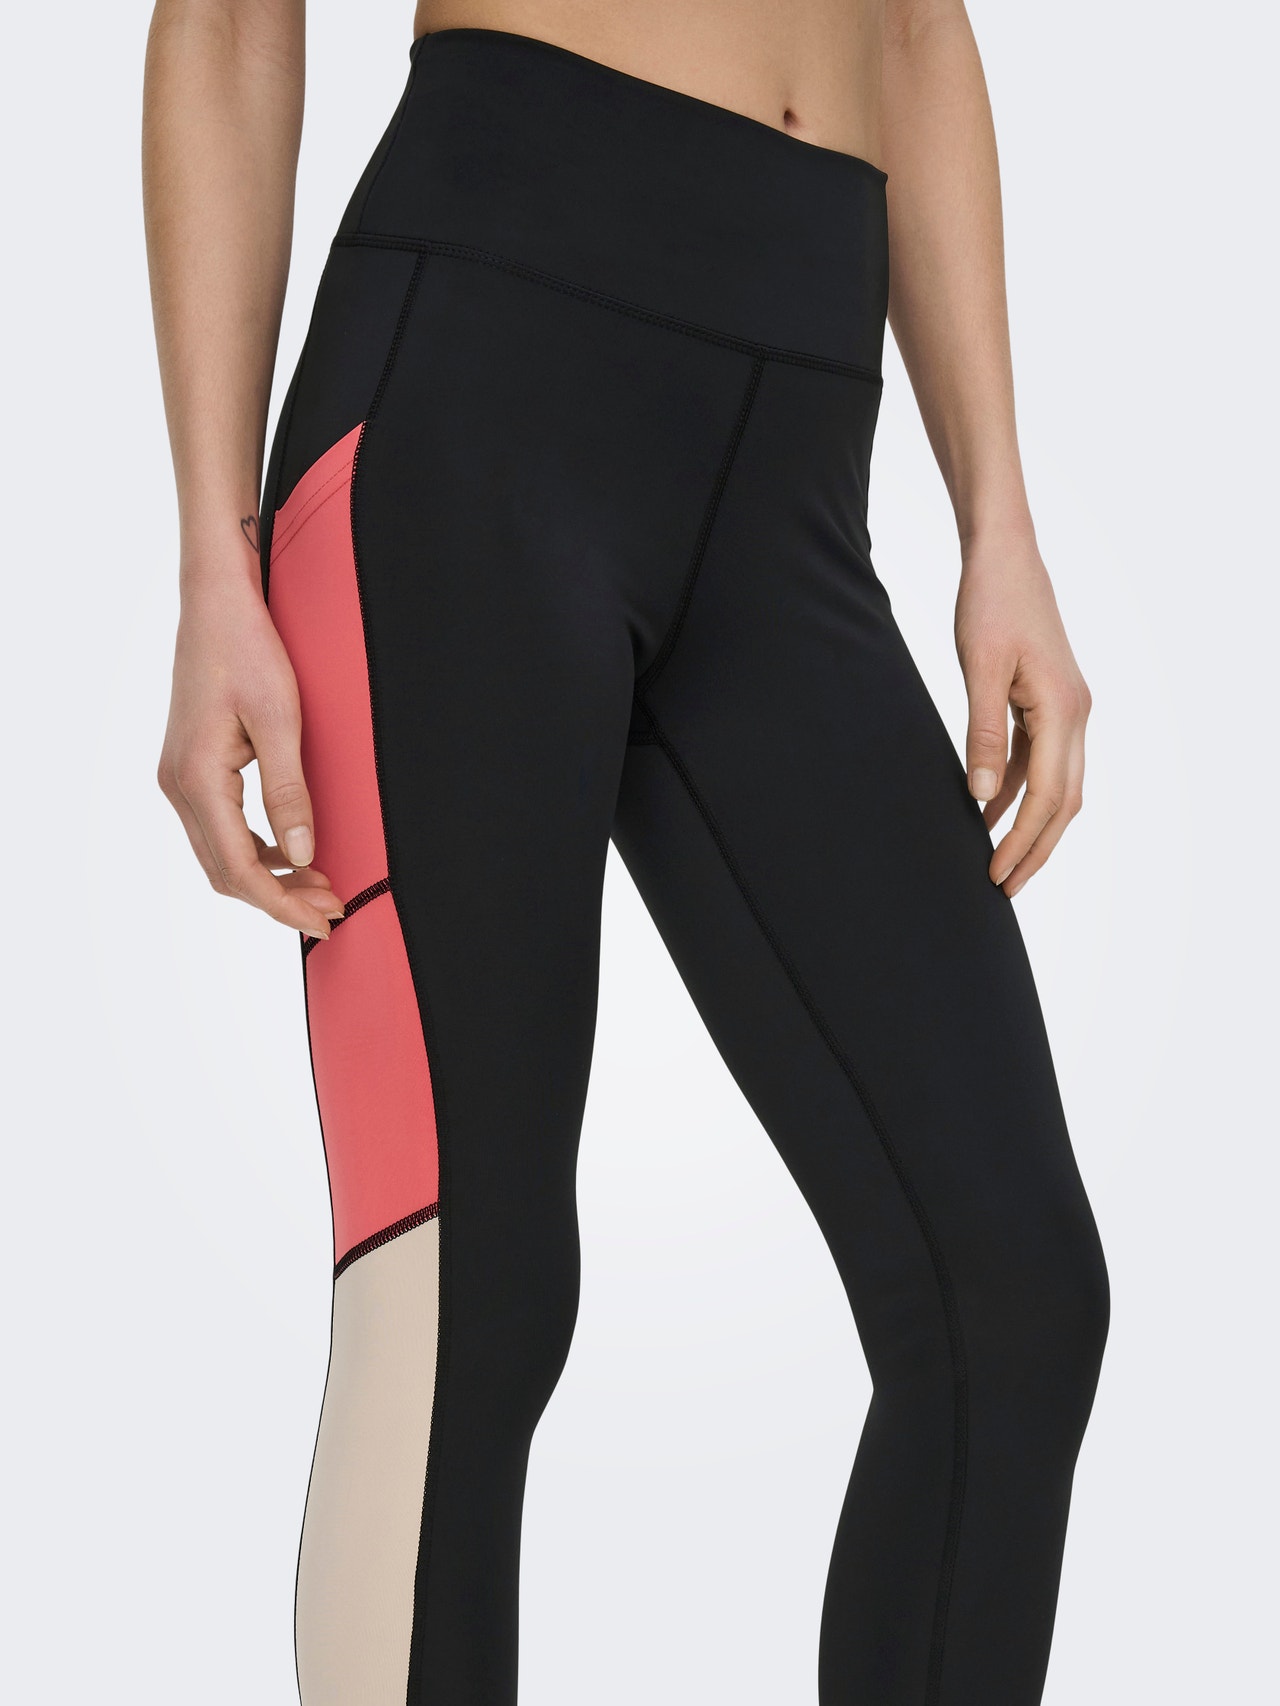 ONLY Tight Fit High waist Leggings -Black - 15287829